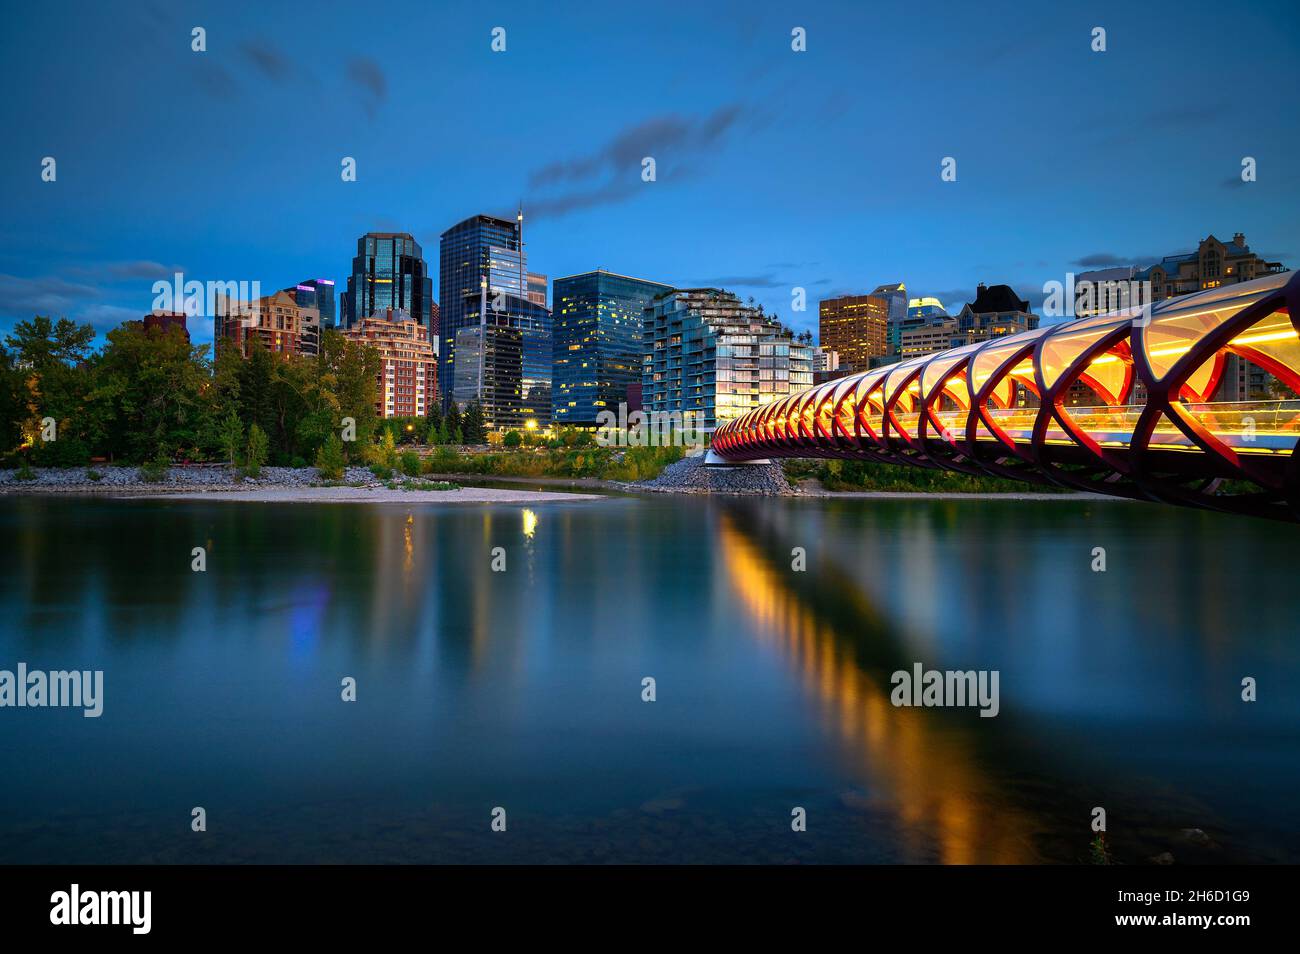 Peace Bridge across the Bow River and Calgary skyline photographed at night Stock Photo